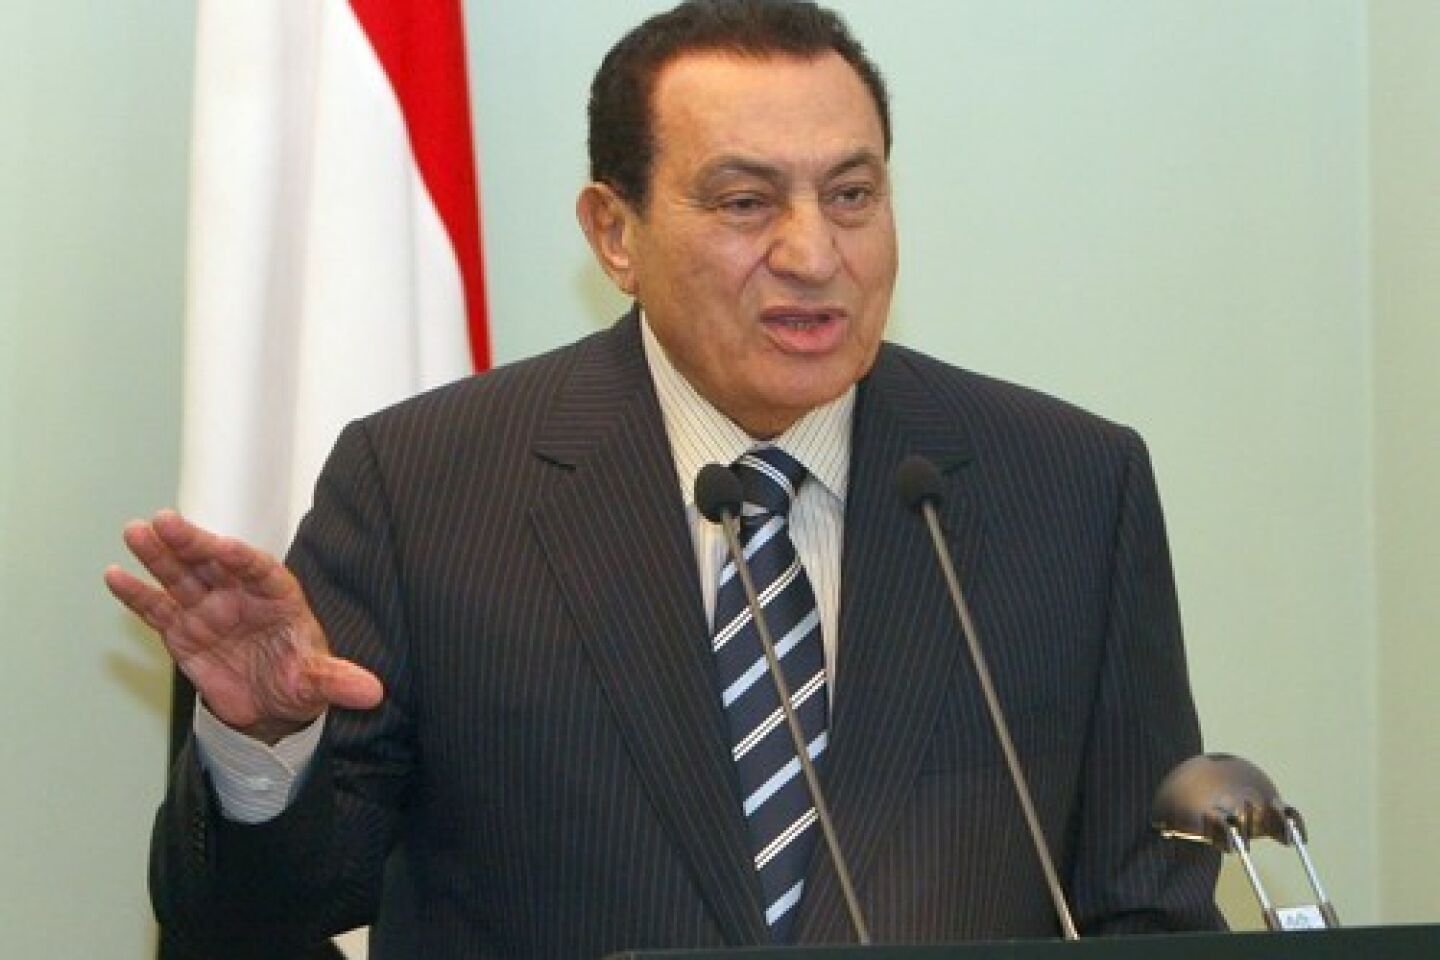 Former Egyptian President Hosni Mubarak crushed dissent for decades until the 2011 Arab Spring movement drove him from power. During his presidency, which spanned nearly 30 years, he protected Egypt's stability as intifadas roiled Israel and the Palestinian territories, the U.S. led two wars against Iraq, Iran fomented militant Shiite Islam across the region and global terrorism complicated the divide between East and West. He was 91.